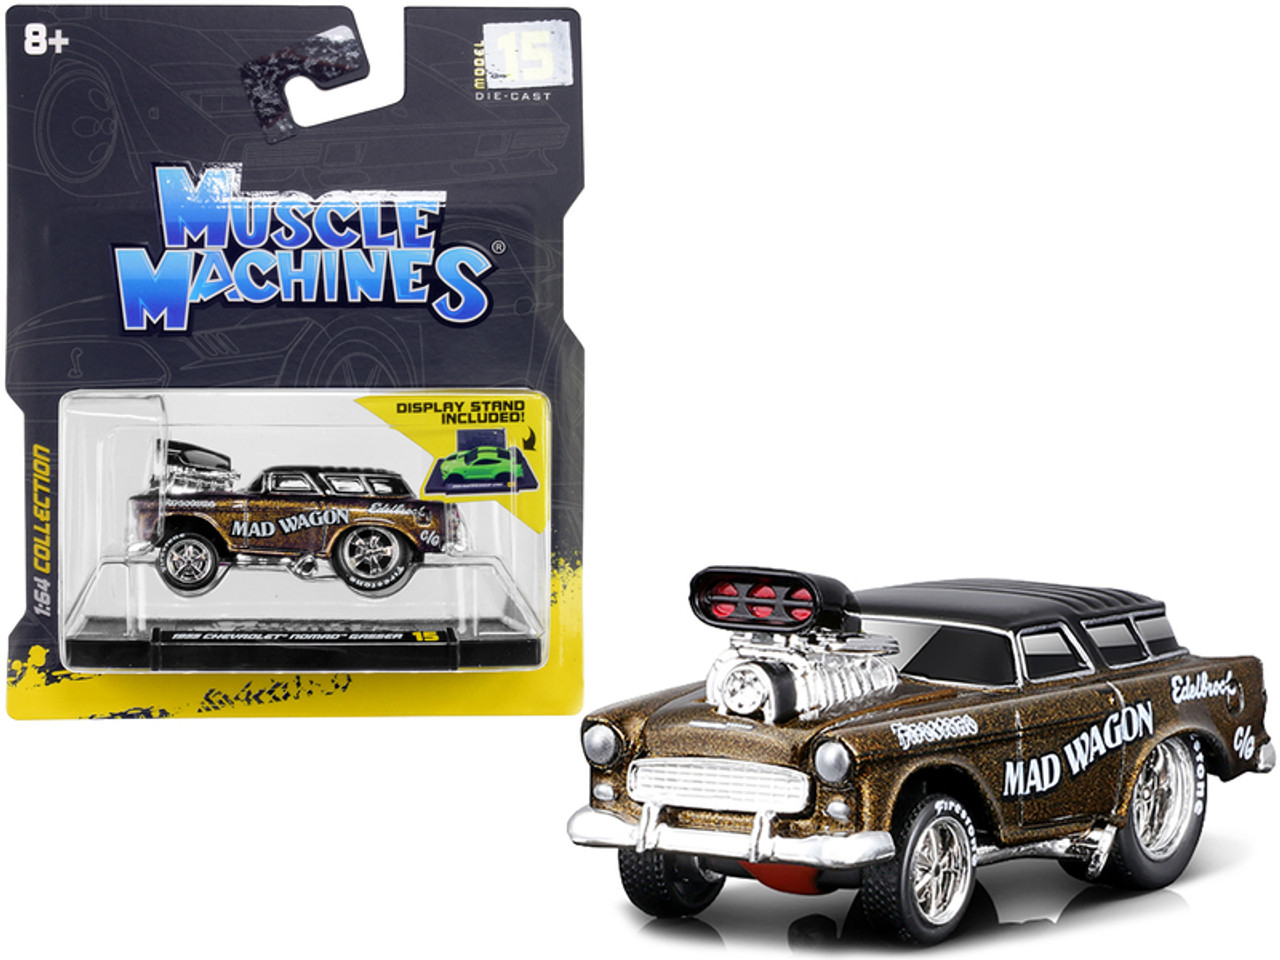 1955 Chevrolet Nomad Gasser Gold Metallic with Black Top "Mad Wagon" 1/64 Diecast Model Car by Muscle Machines